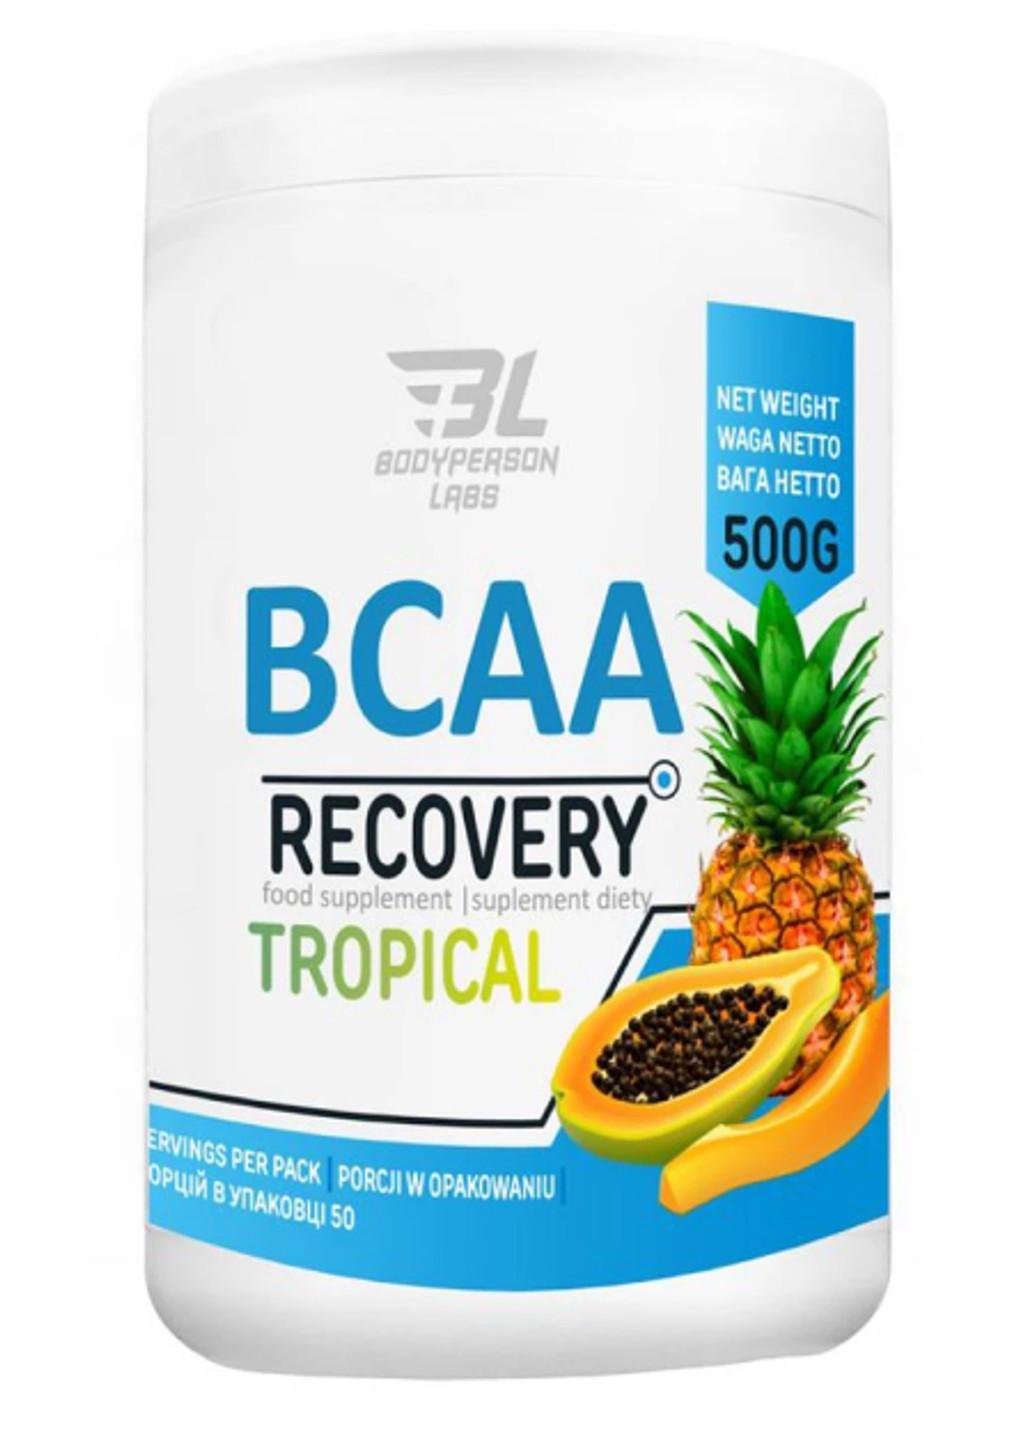 БЦАА BCAA Recovery 500 г Tropical Bodyperson Labs (255363650)